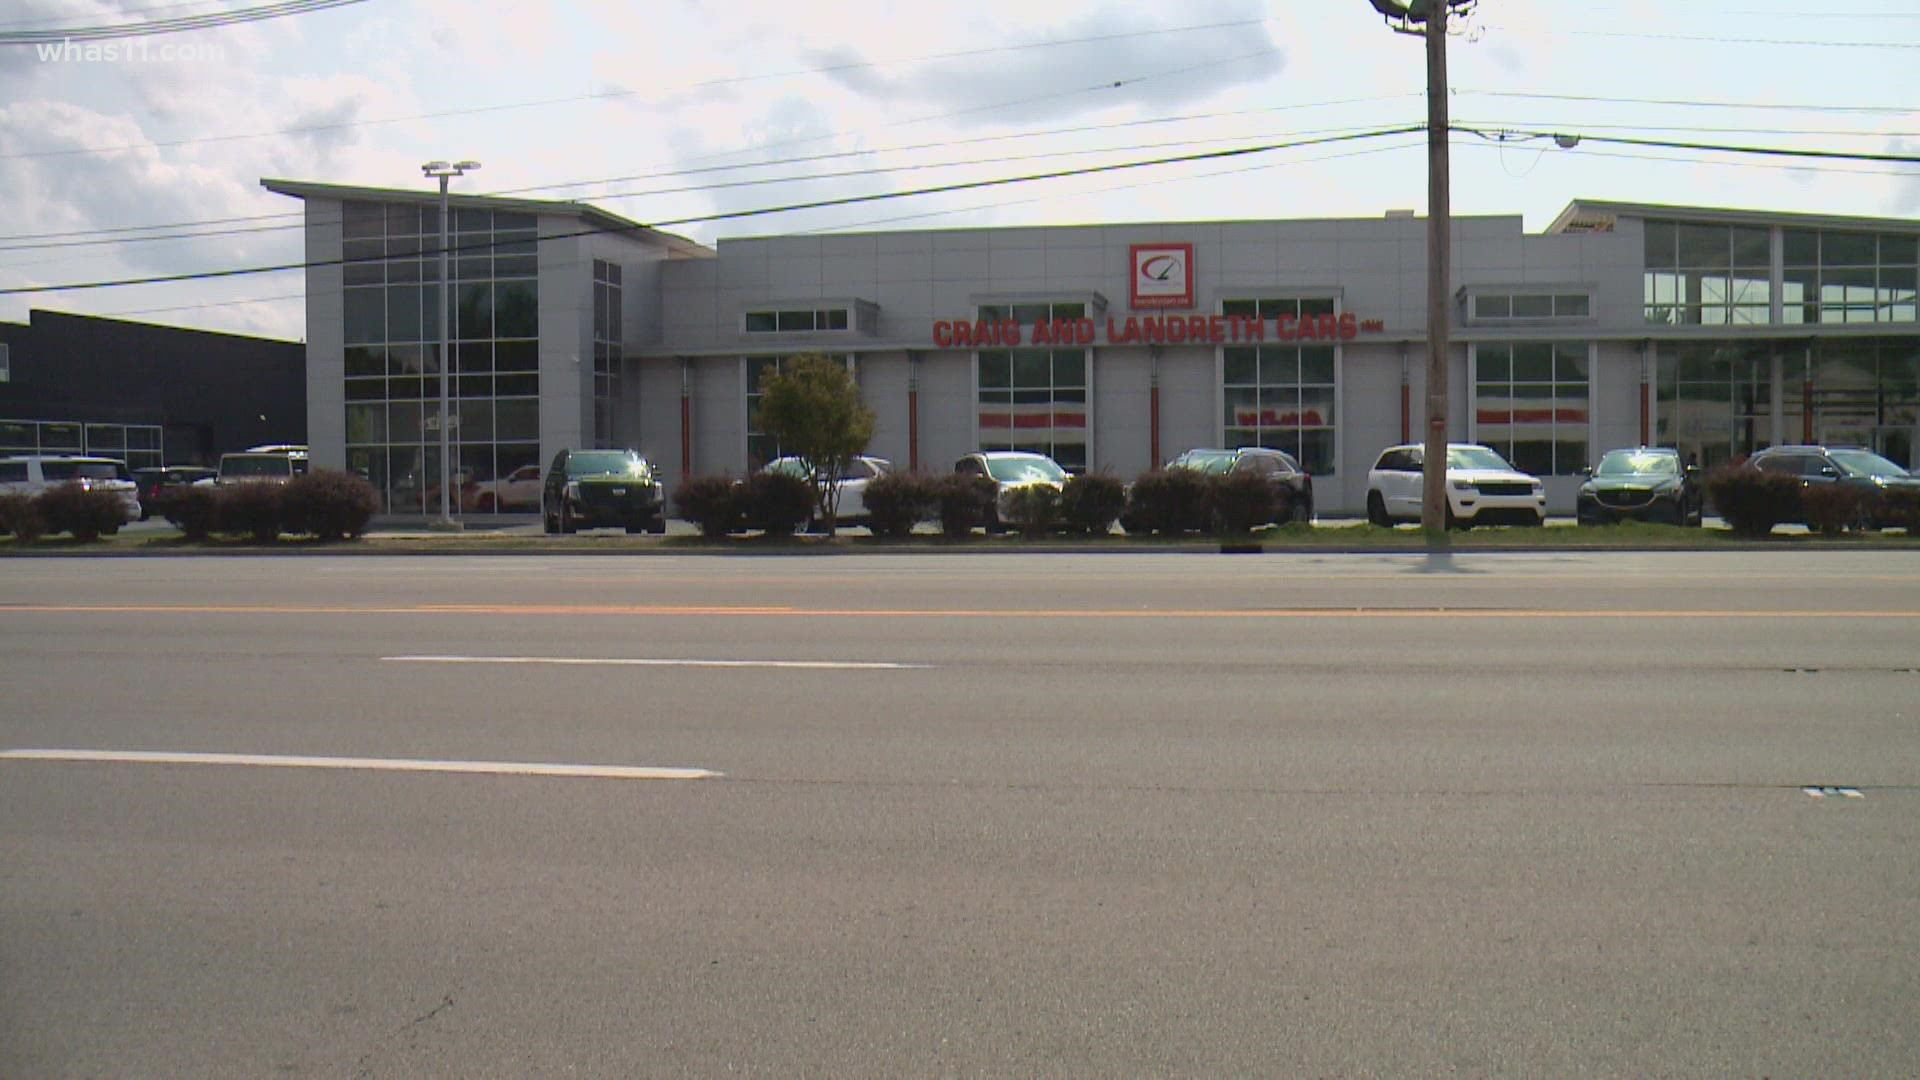 Oxmoor Toyota, Champion Chevrolet, BMW Louisville and Craig and Landreth among dealerships police say were targeted.